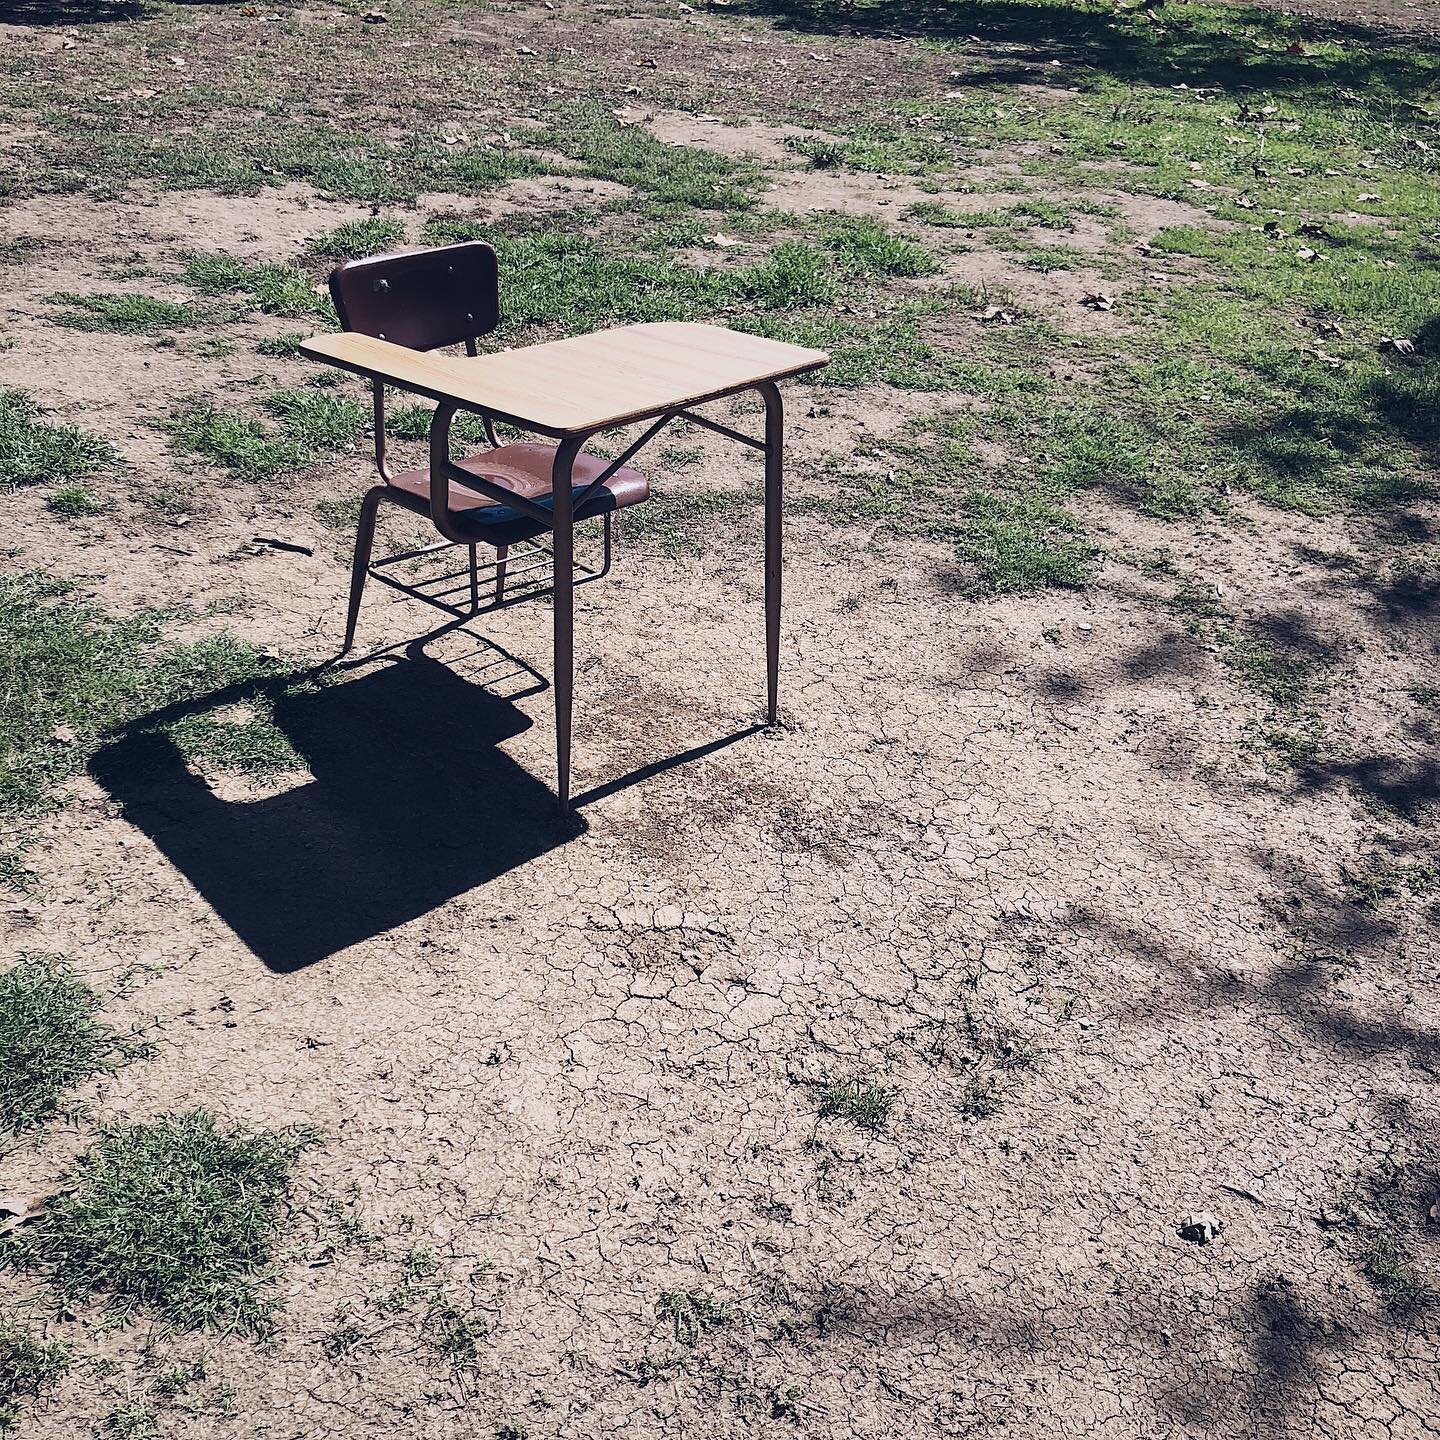 Shh, quick quick, look here...a wild desk! Usually timid and generally traumatized, desks have reclaimed empty school yards amidst COVID-19 lockdown. Deprived of old gum and food wrappers, this young desk was found scavenging for food on a dry lawn i